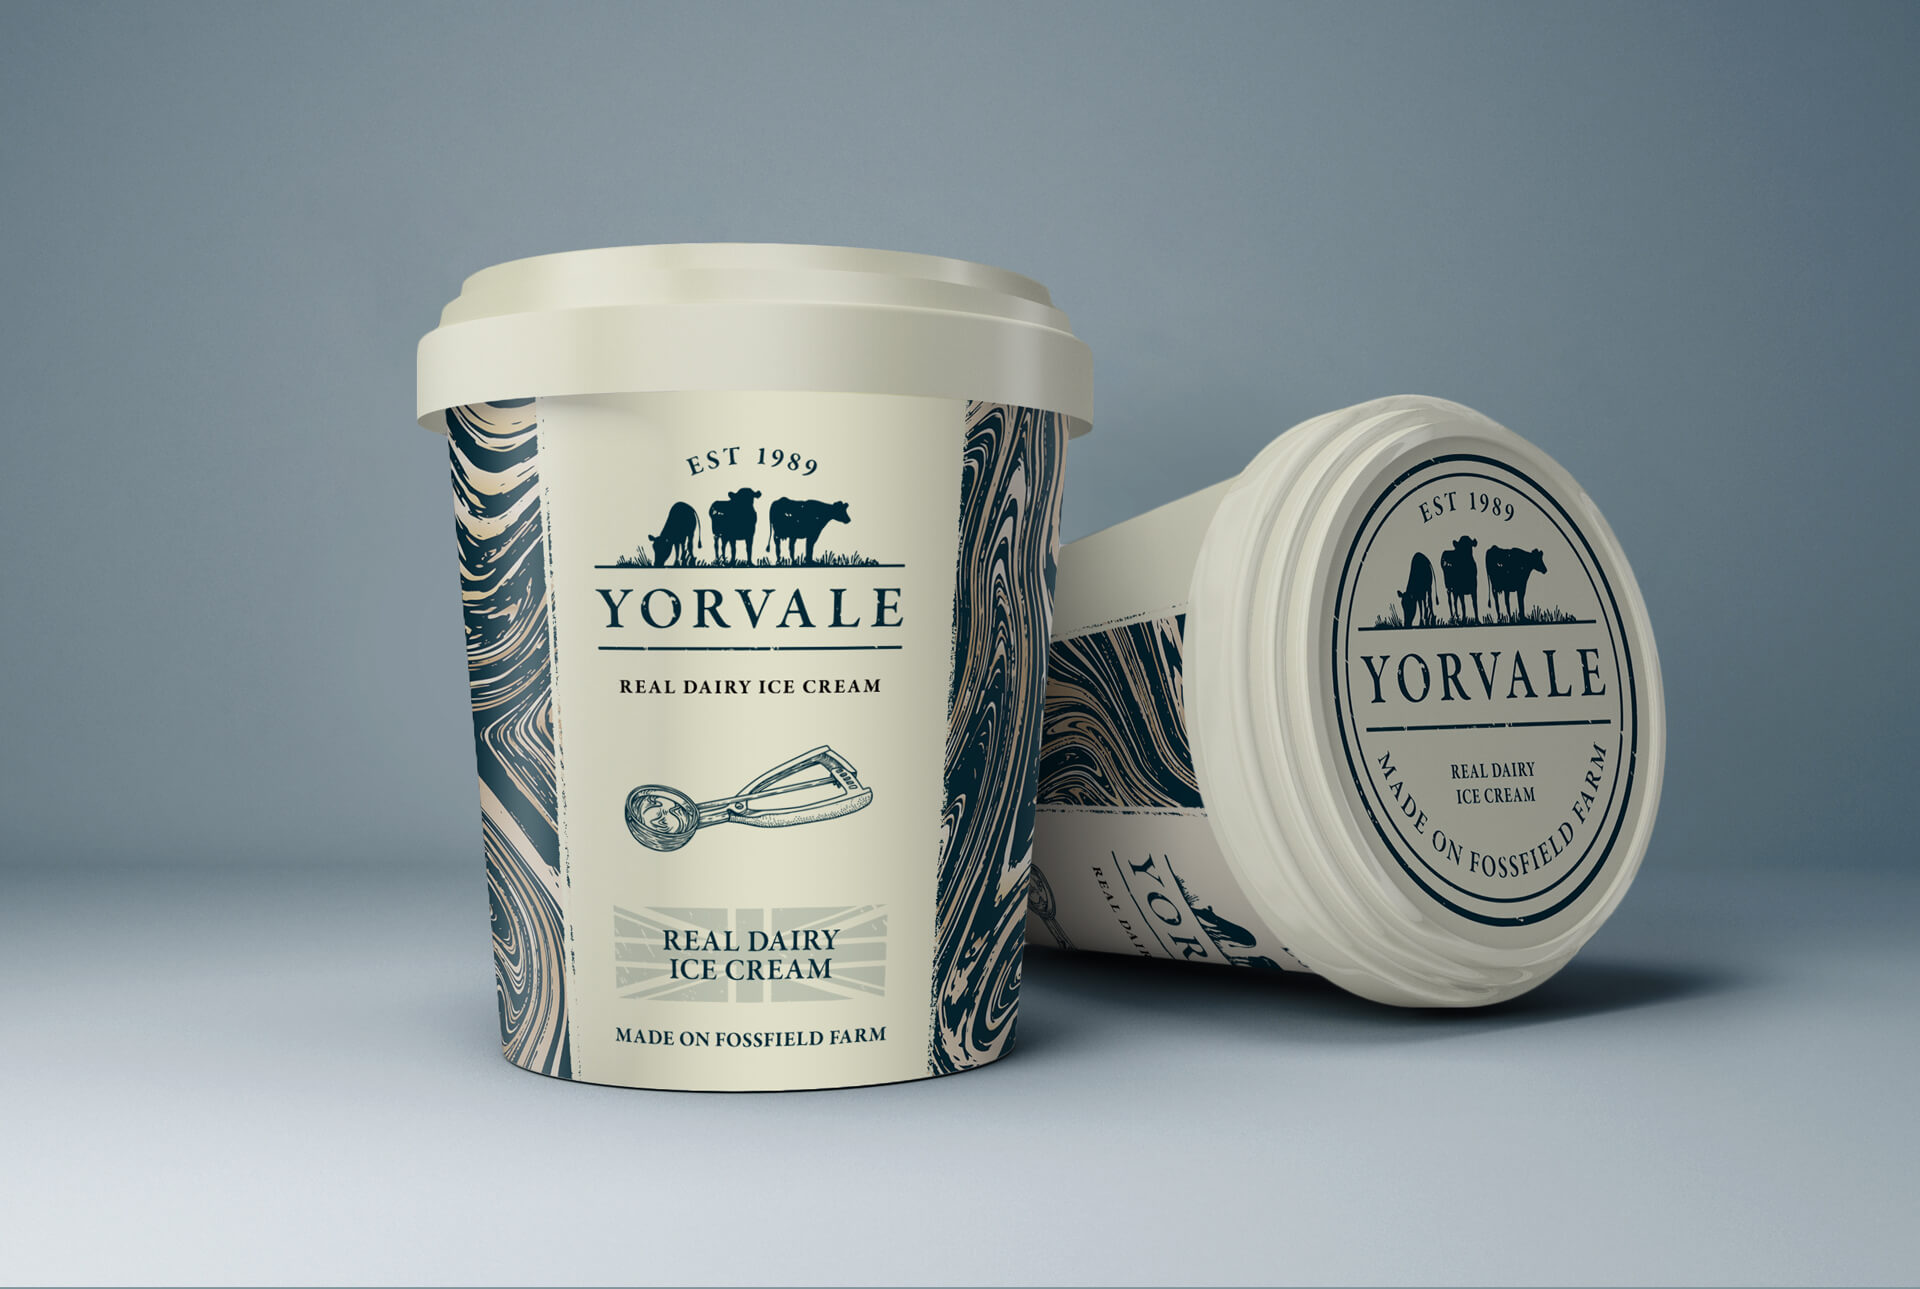 Real dairy ice cream in the official Yorvale packaging with marbling design.